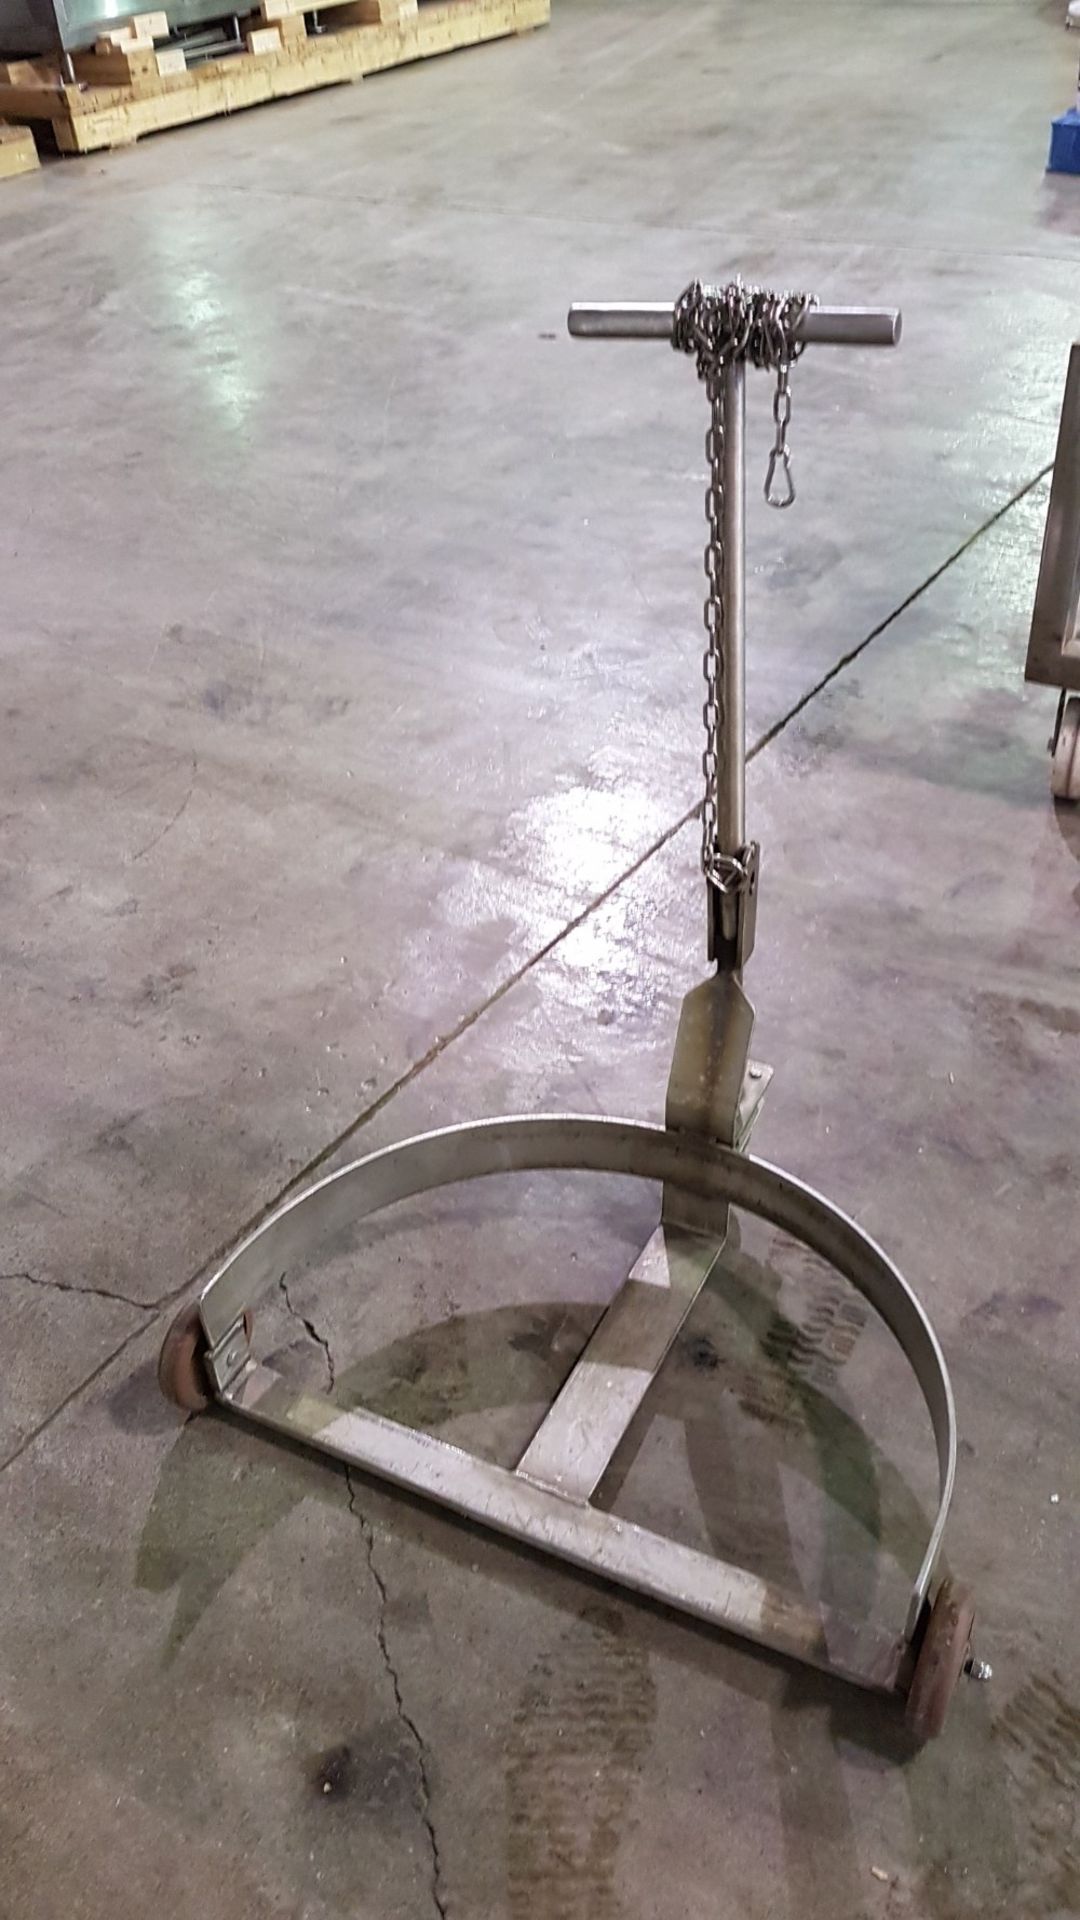 Used circular tote transport, stainless steel construction